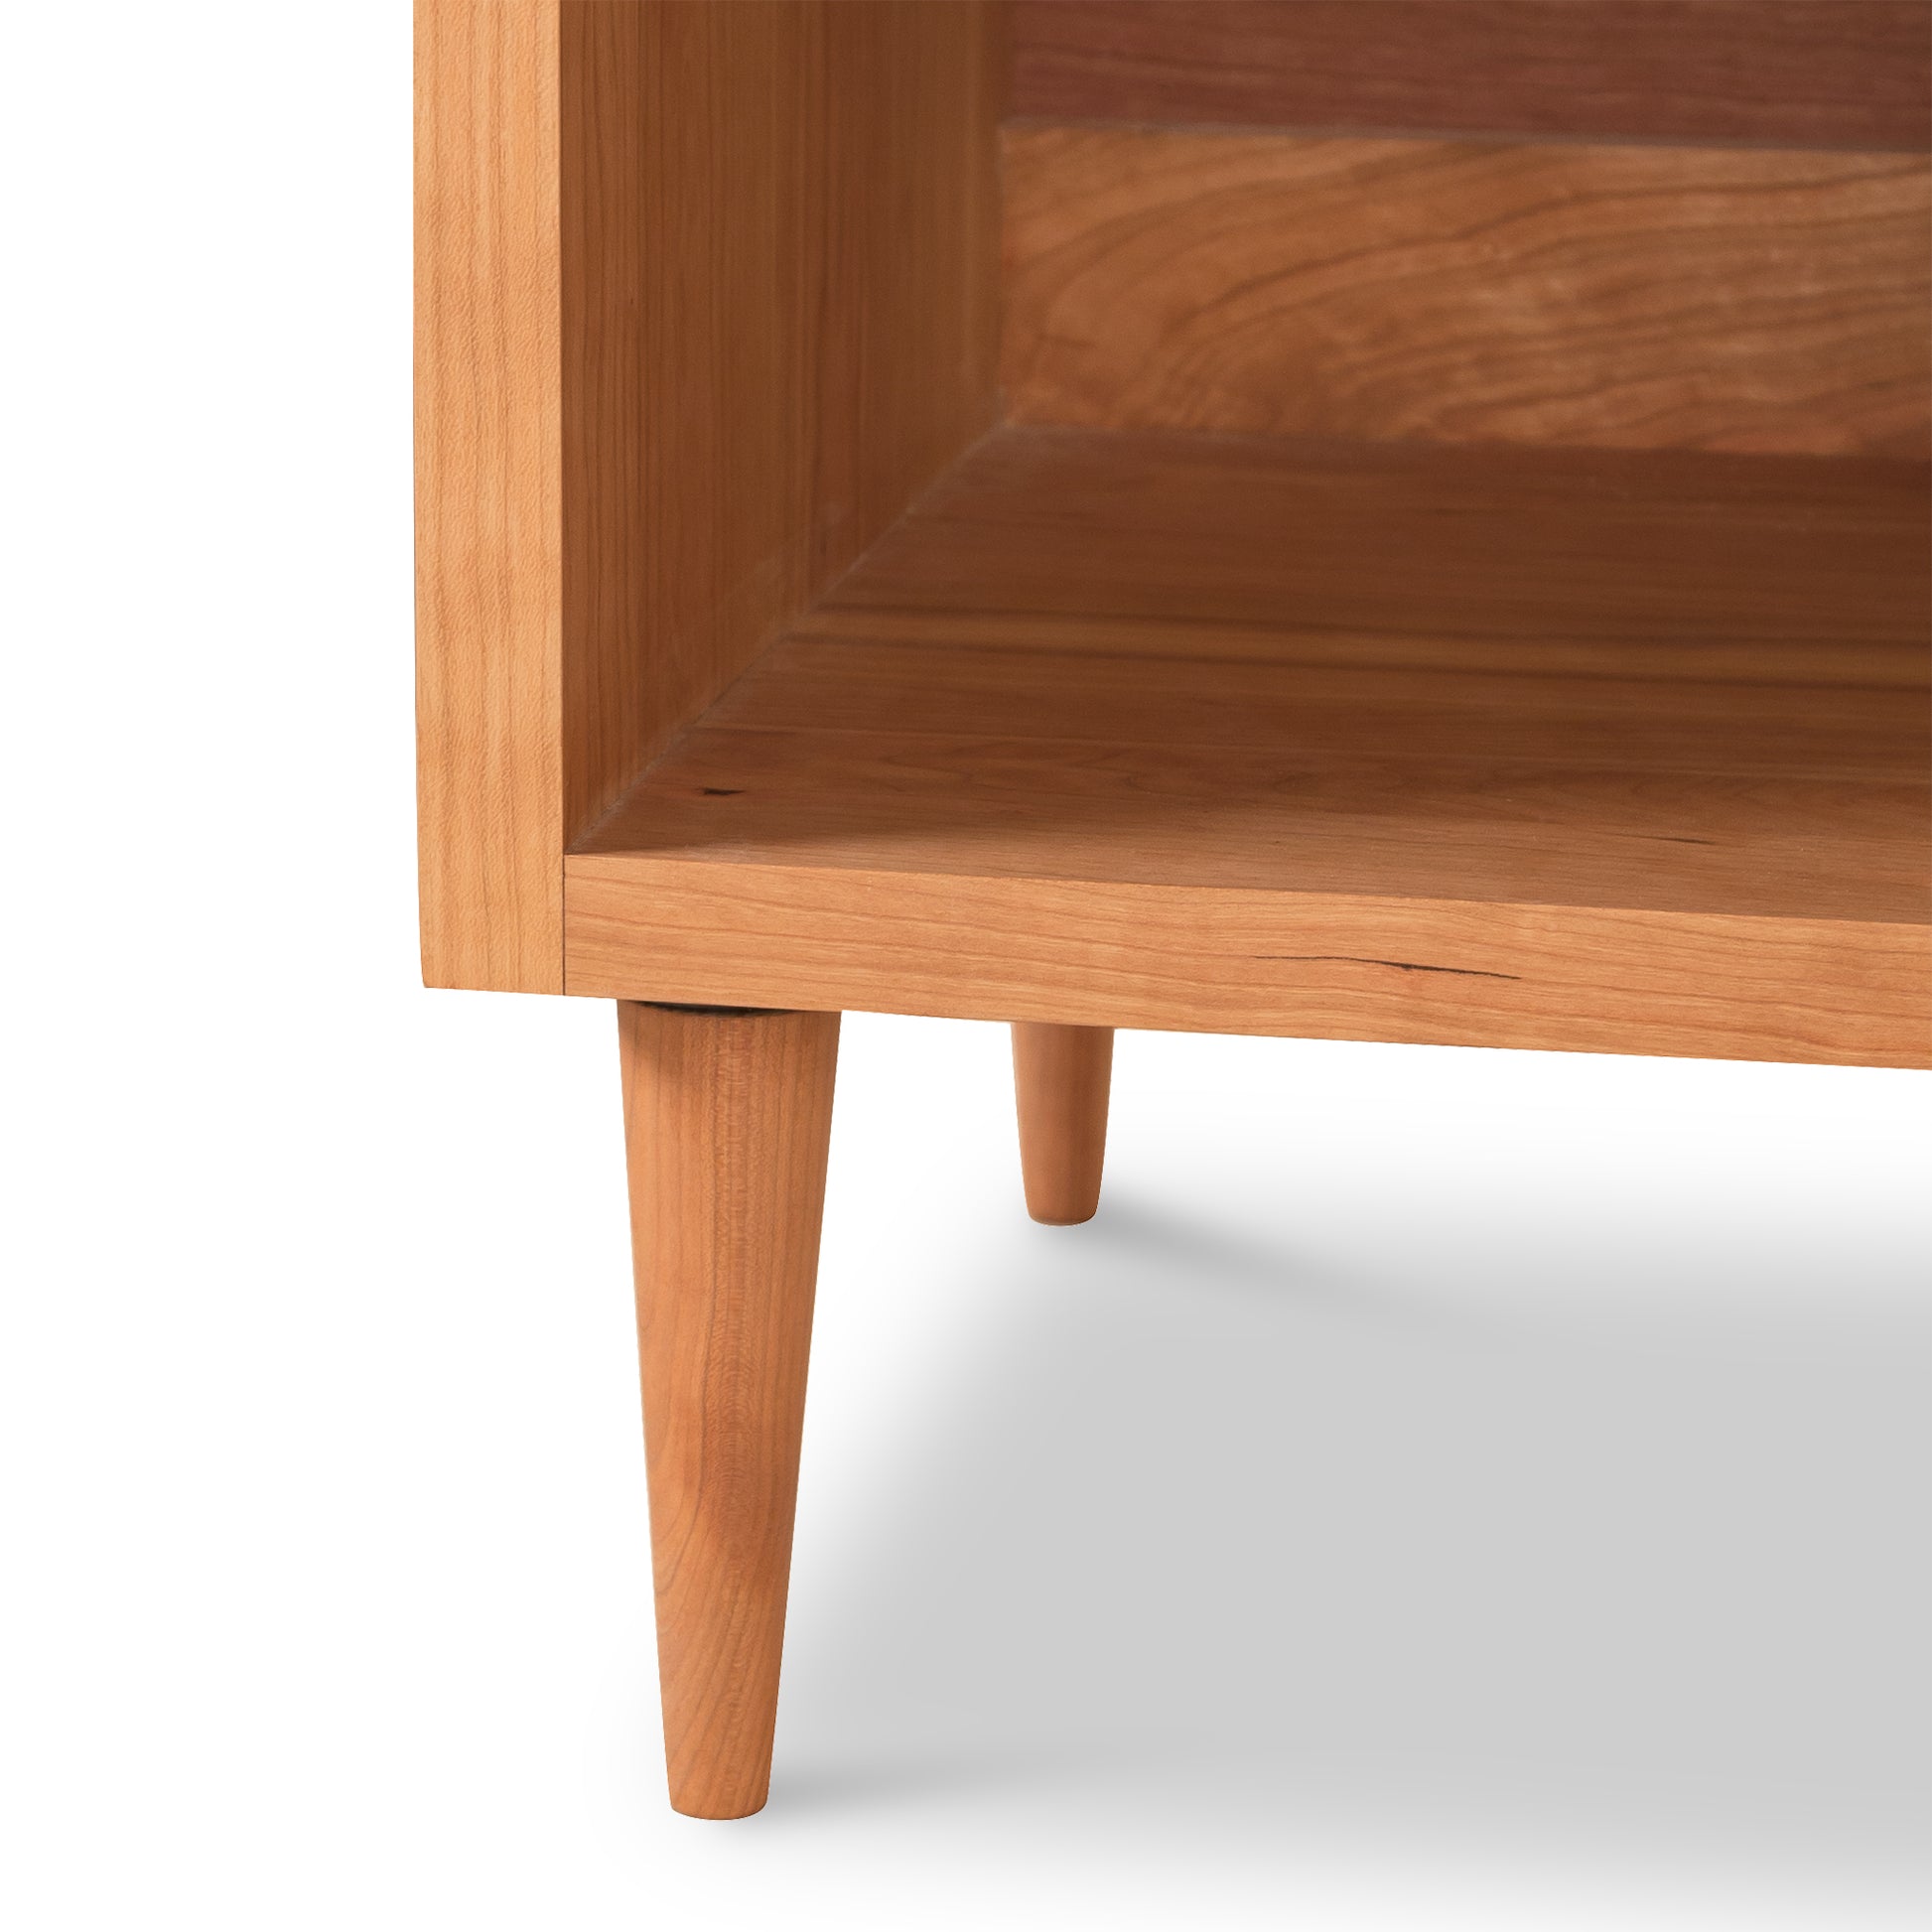 The Larssen 1-Drawer Enclosed Shelf Nightstand by Vermont Furniture Designs is a stunning wooden side table with two legs, featuring natural hardwoods and a mid-century modern design. It stands elegantly on a white background.